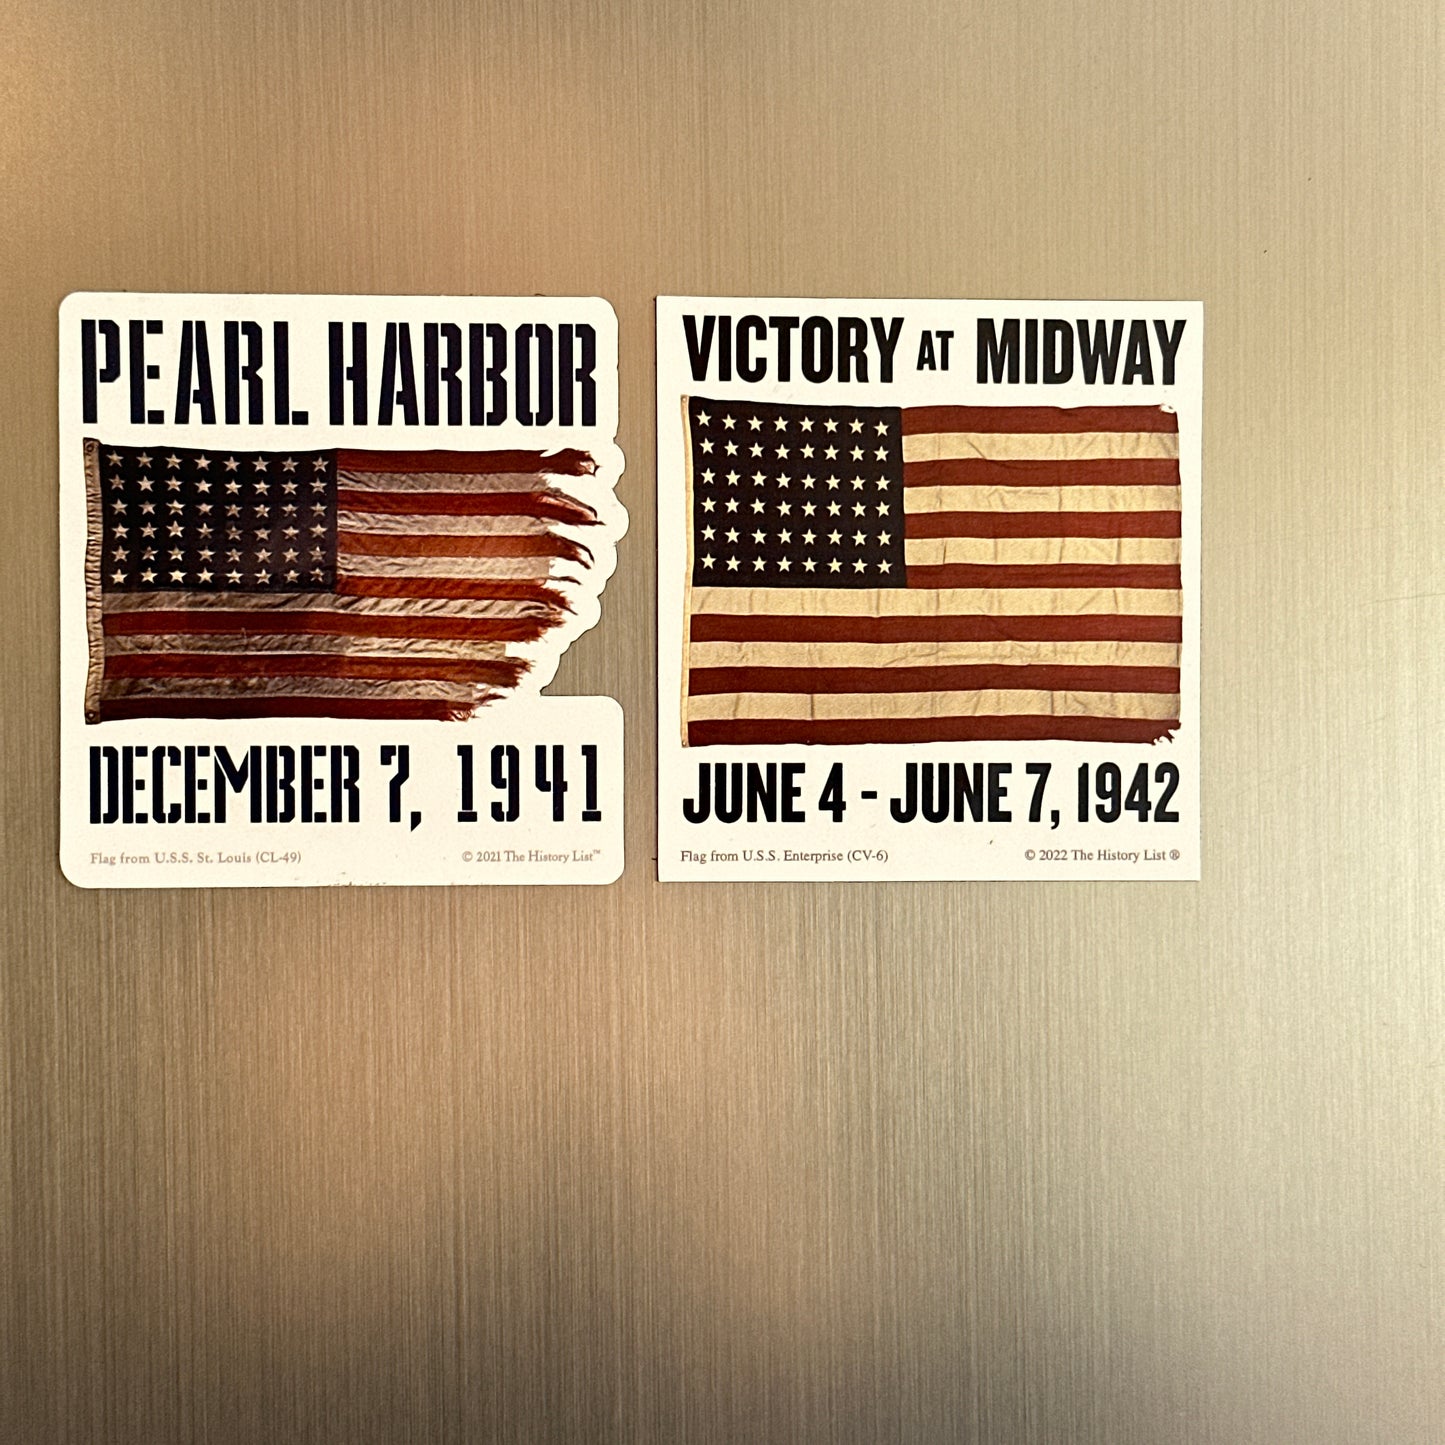 Pearl Harbor “Battleship Row” Magnet and "Victory at Midway" magnet from The History List store